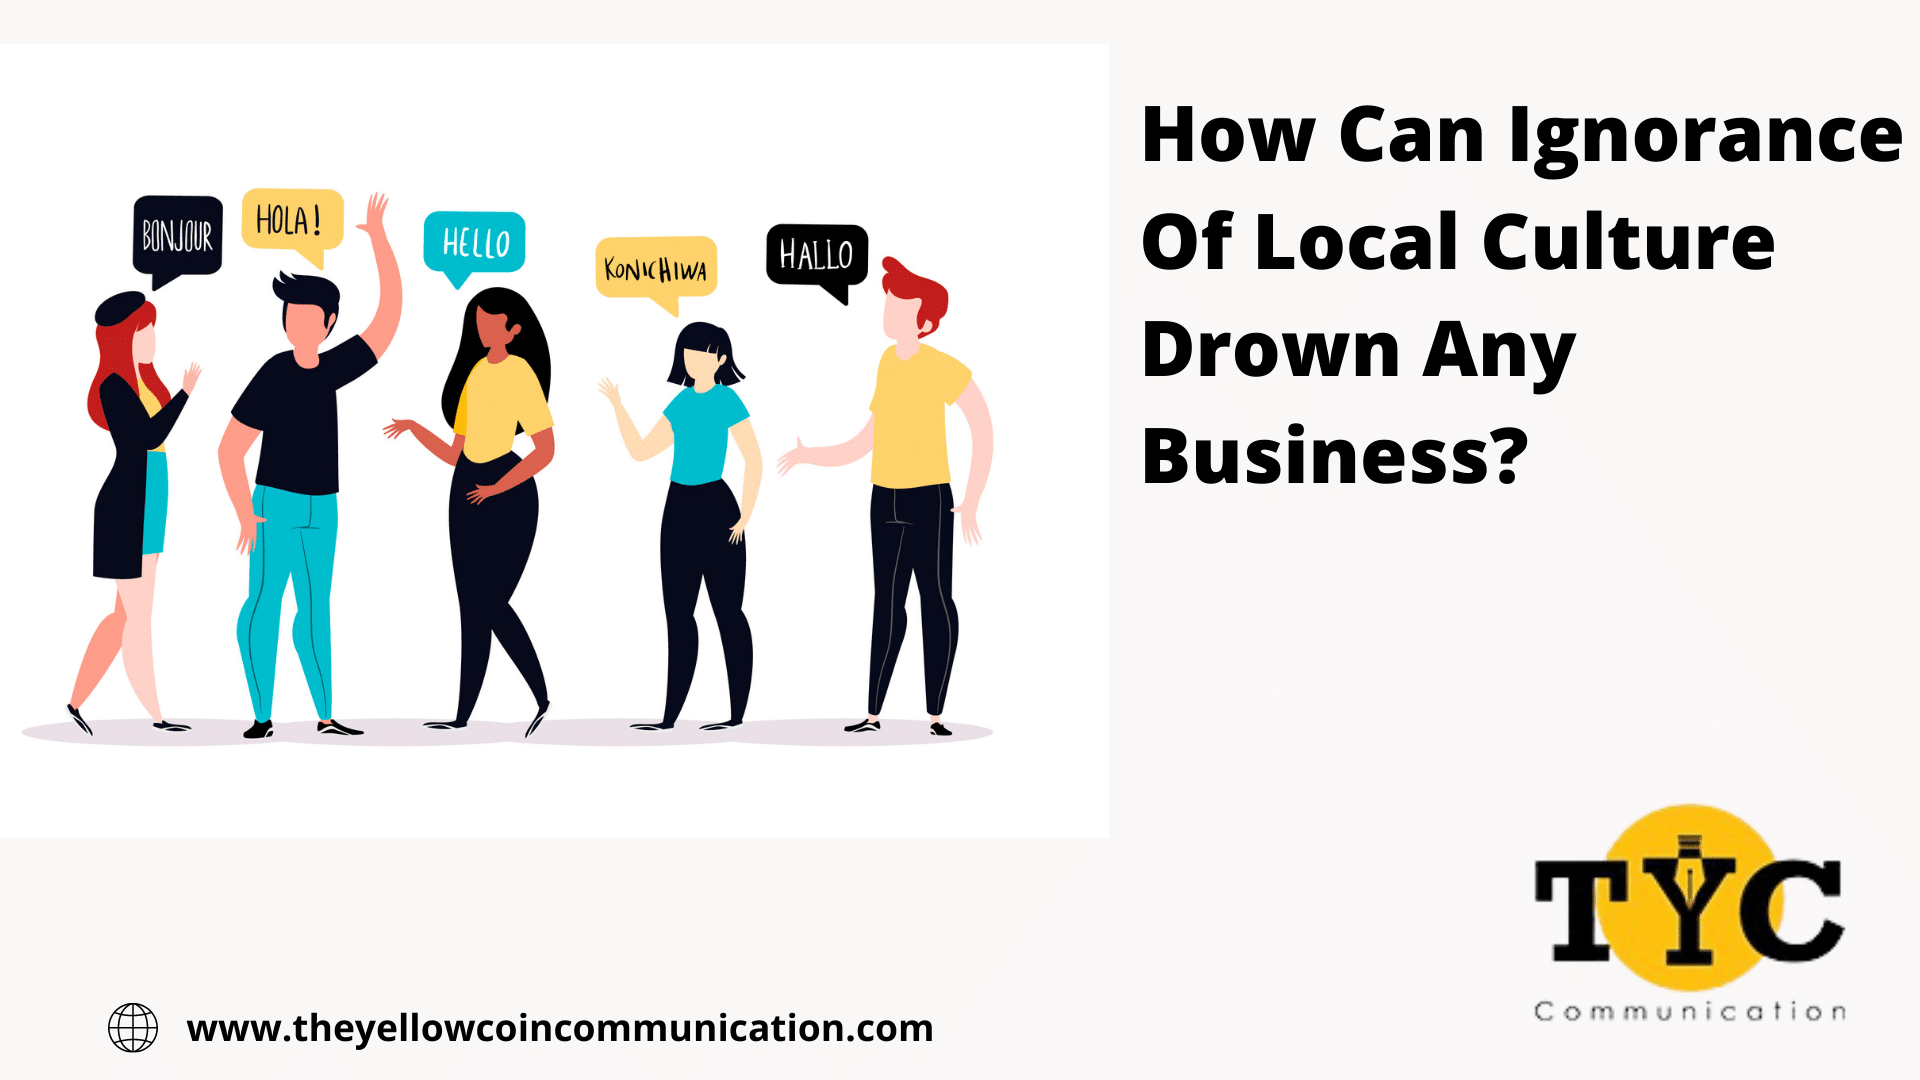 How Can Ignorance Of Local Culture Drown Any Business?